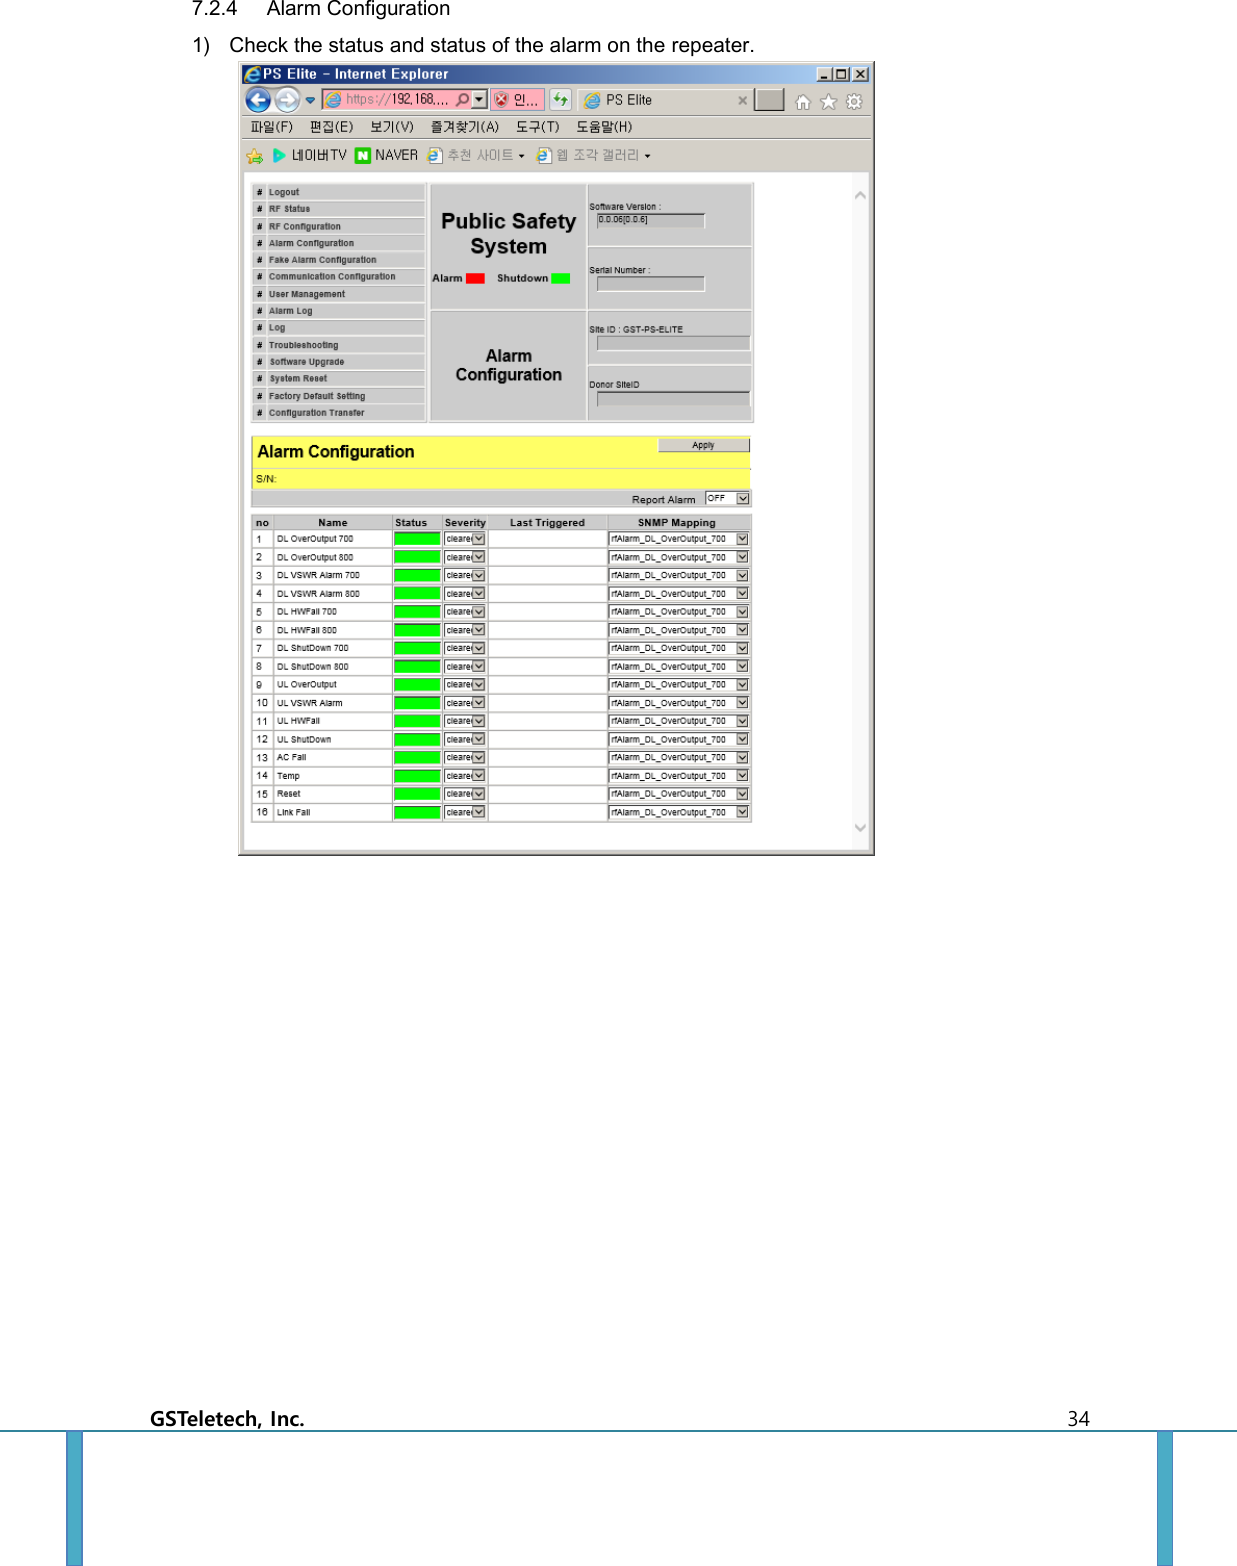  GSTeletech, Inc.    34 7.2.4 Alarm Configuration 1) Check the status and status of the alarm on the repeater.     